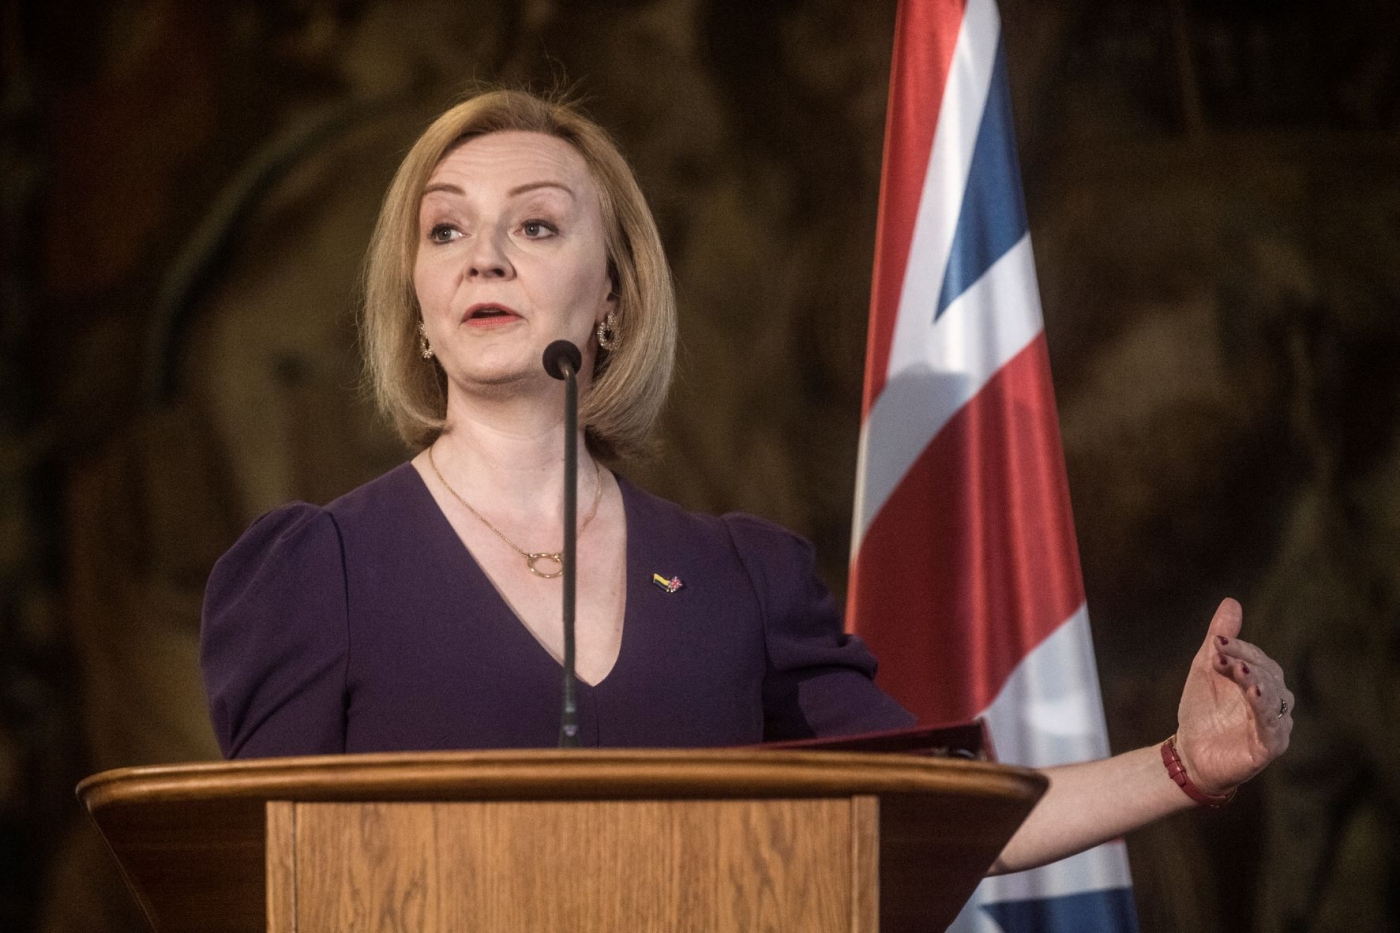 British Secretary for Foreign Affairs Liz Truss attends a joint press conference with her Czech counterpart in Prague, 27 May 2022 (AFP)